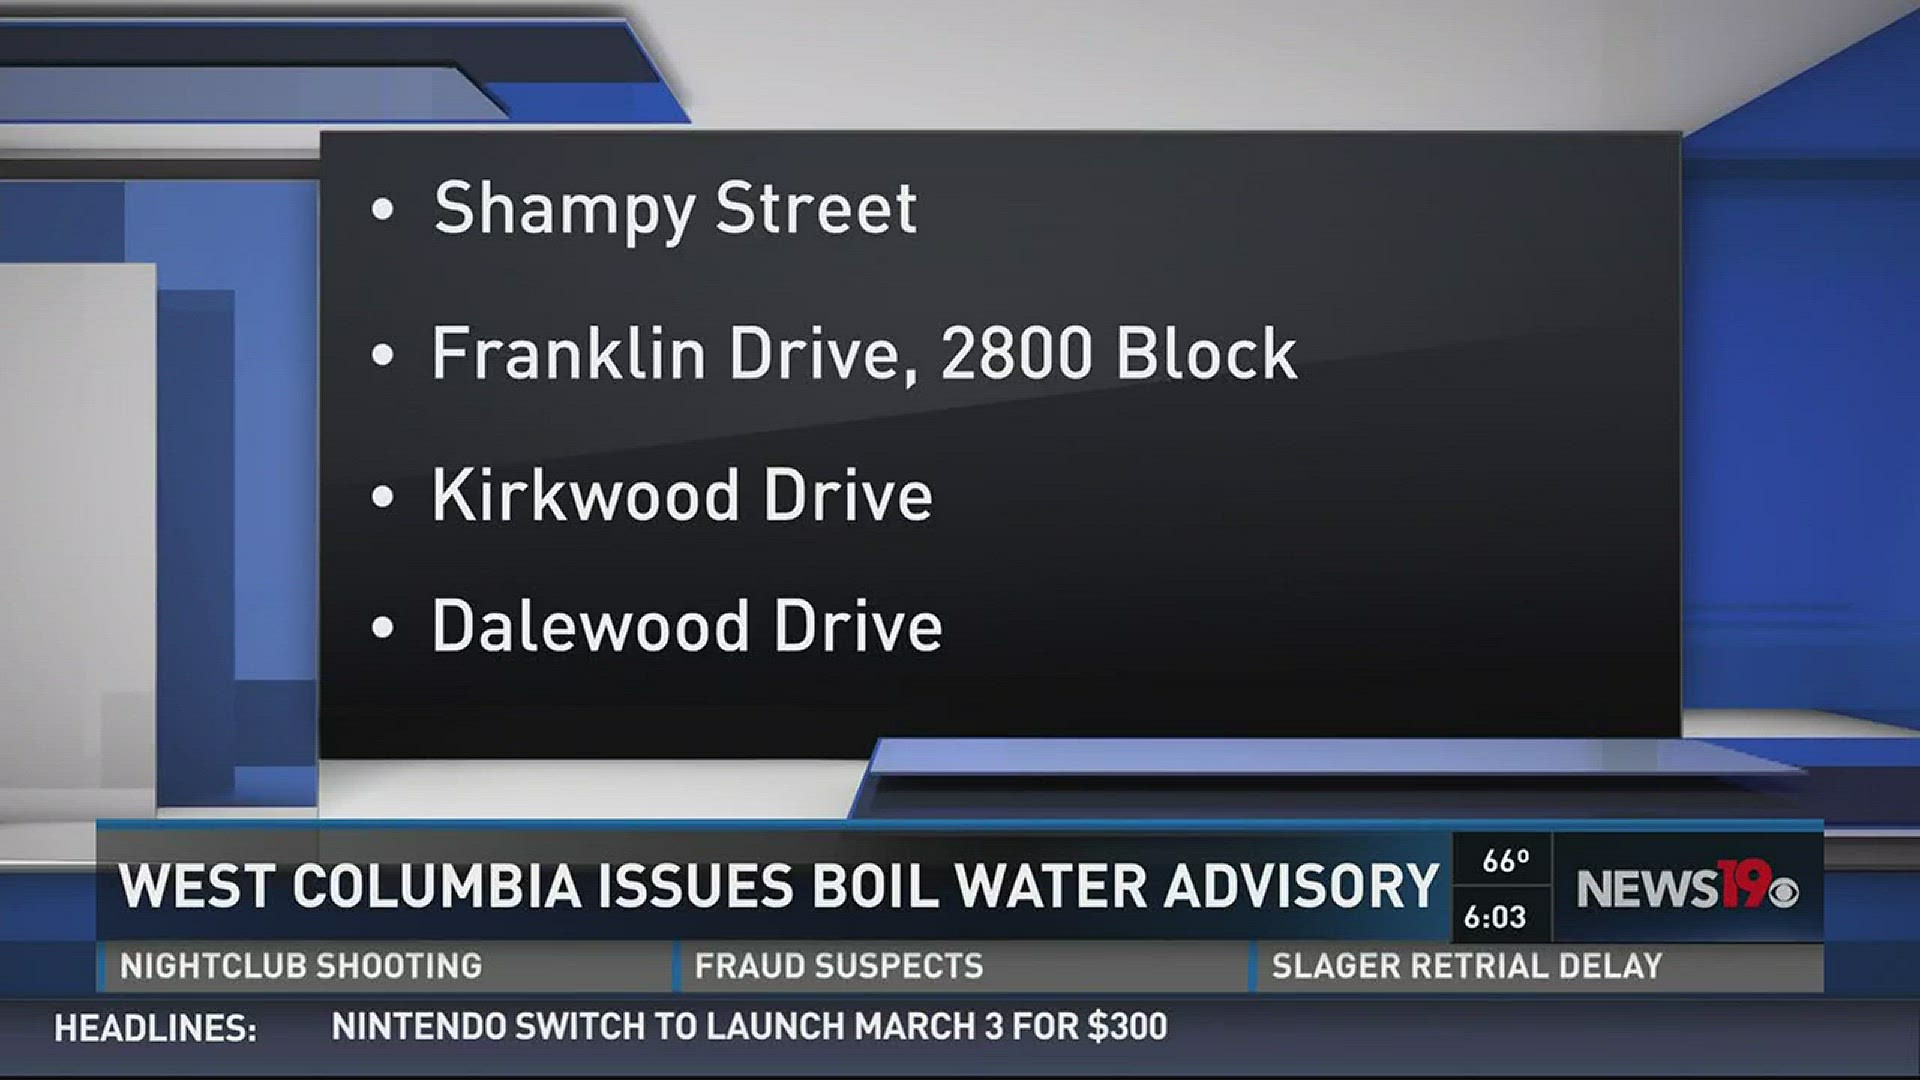 The City of West Columbia has issued a boil water advisory after a water line break.